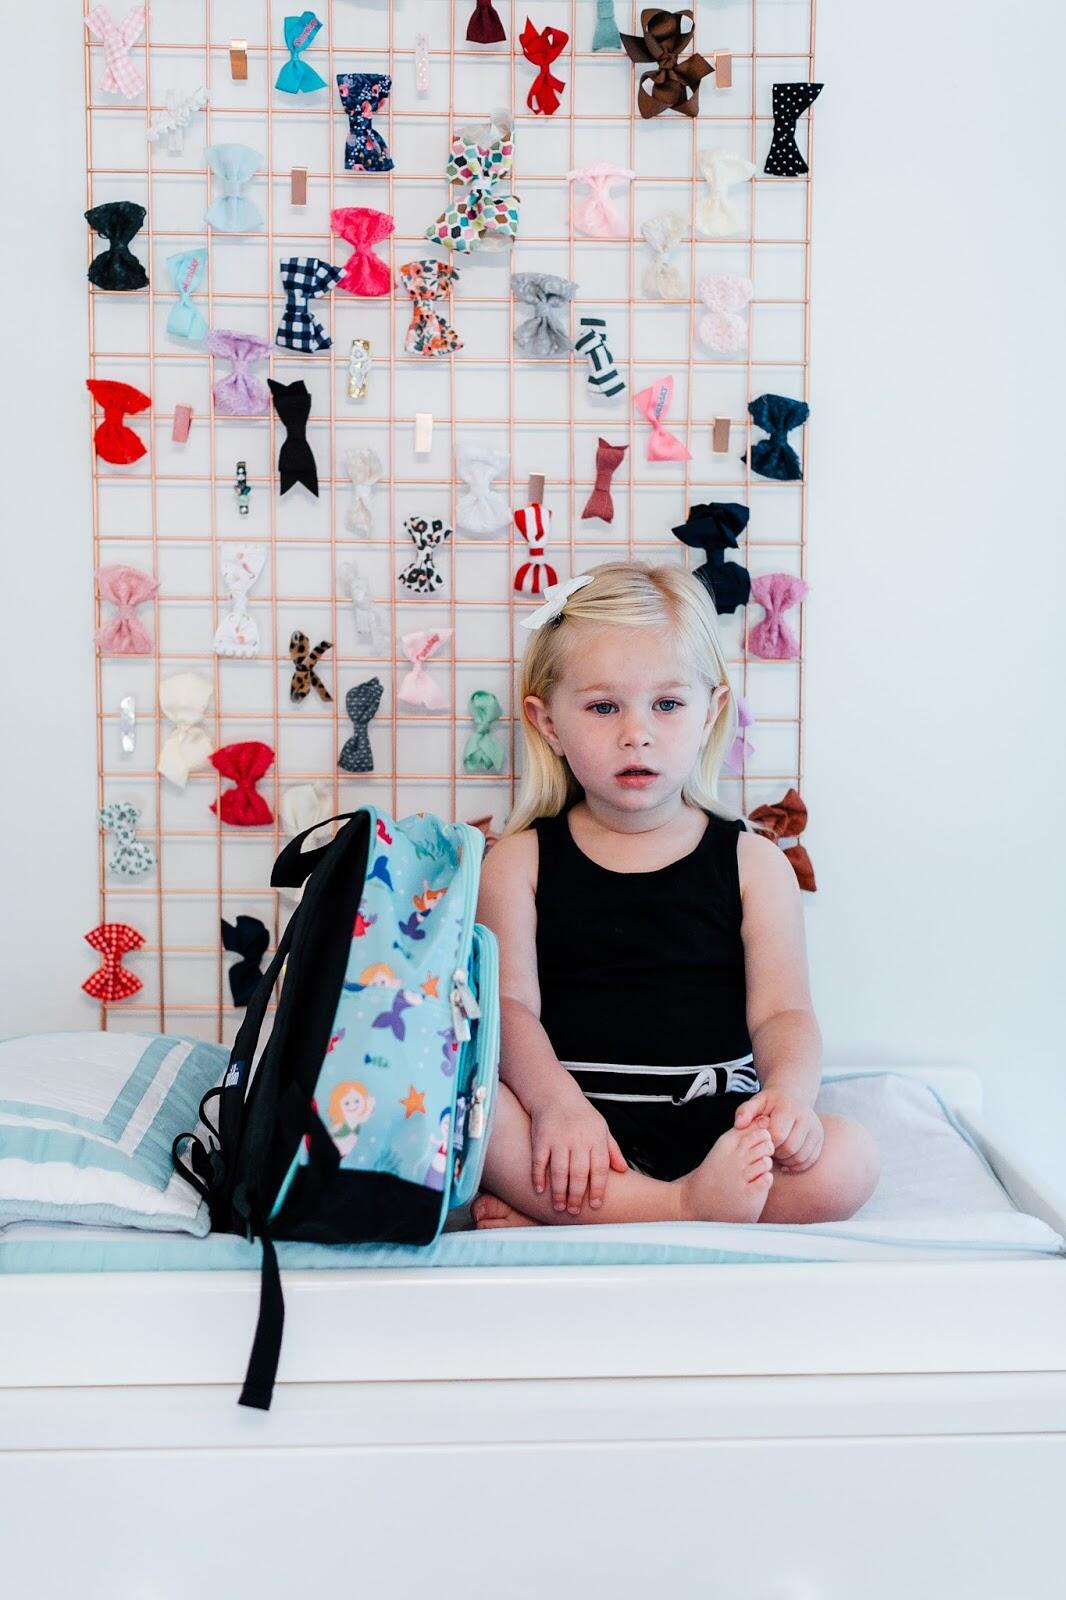 Toddler Room Ideas - Leighton's Big Girl Bed & Room Reveal by popular blogger Laura of Walking in Memphis in High Heels